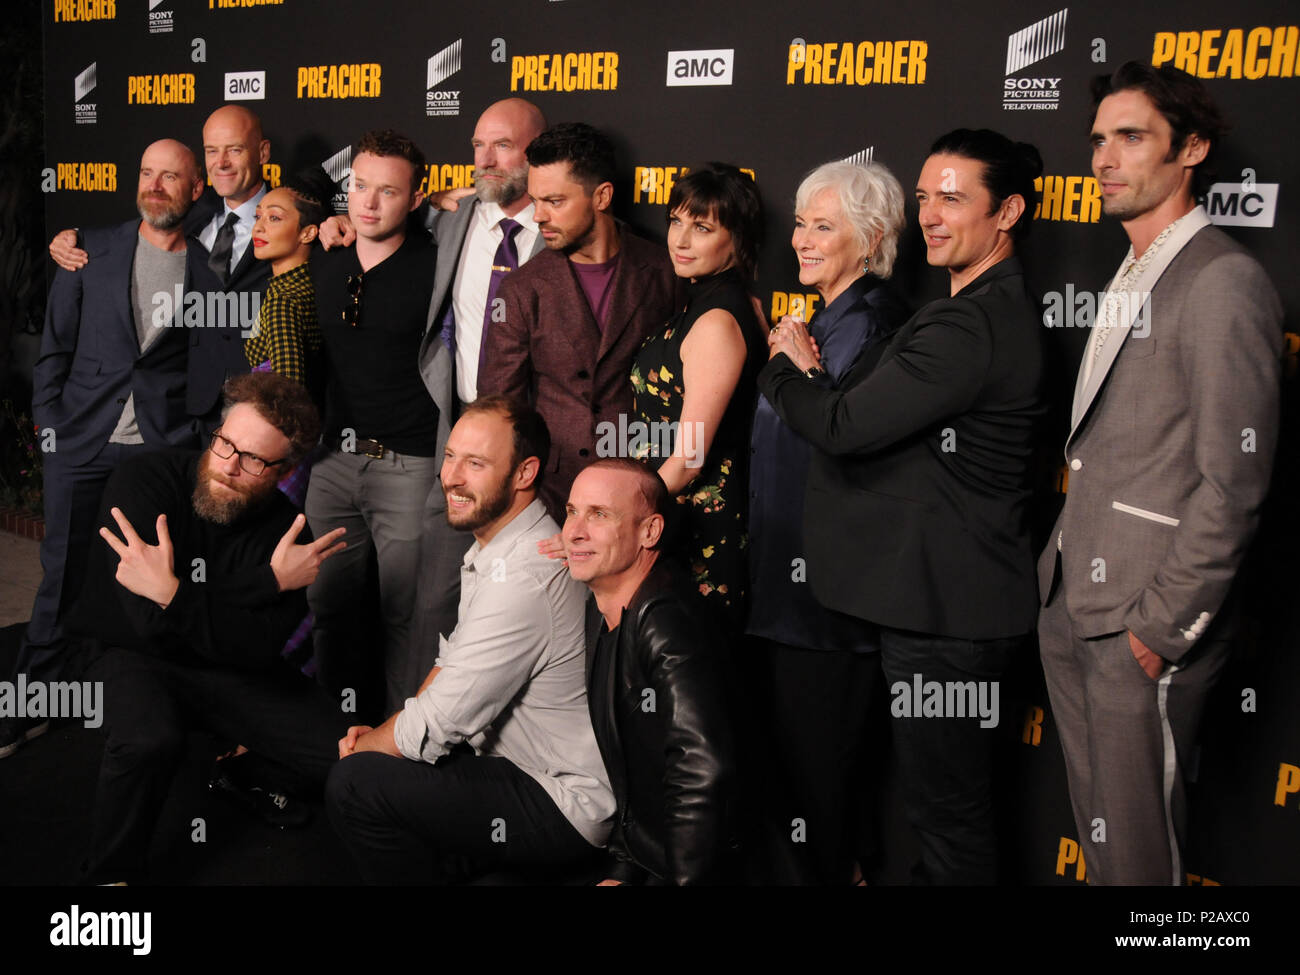 LOS ANGELES, CA - JUNE 14: (L-R) Actor Pip Torrens, actress Ruth Negga, actors Ian Colletti, Graham McTavish, Dominic Cooper, Julie Ann Emery, Betty Buckley, Adam Croasdell, Tyson Ritter and Colin Cunningham and executive producers Seth Rogen and Evan Goldberg (front)  attend AMC's 'Preacher' Season 3 Premiere Party on June 14, 2018 at The Hearth and Hound in Los Angeles, California. Photo by Barry King/Alamy Live News Stock Photo